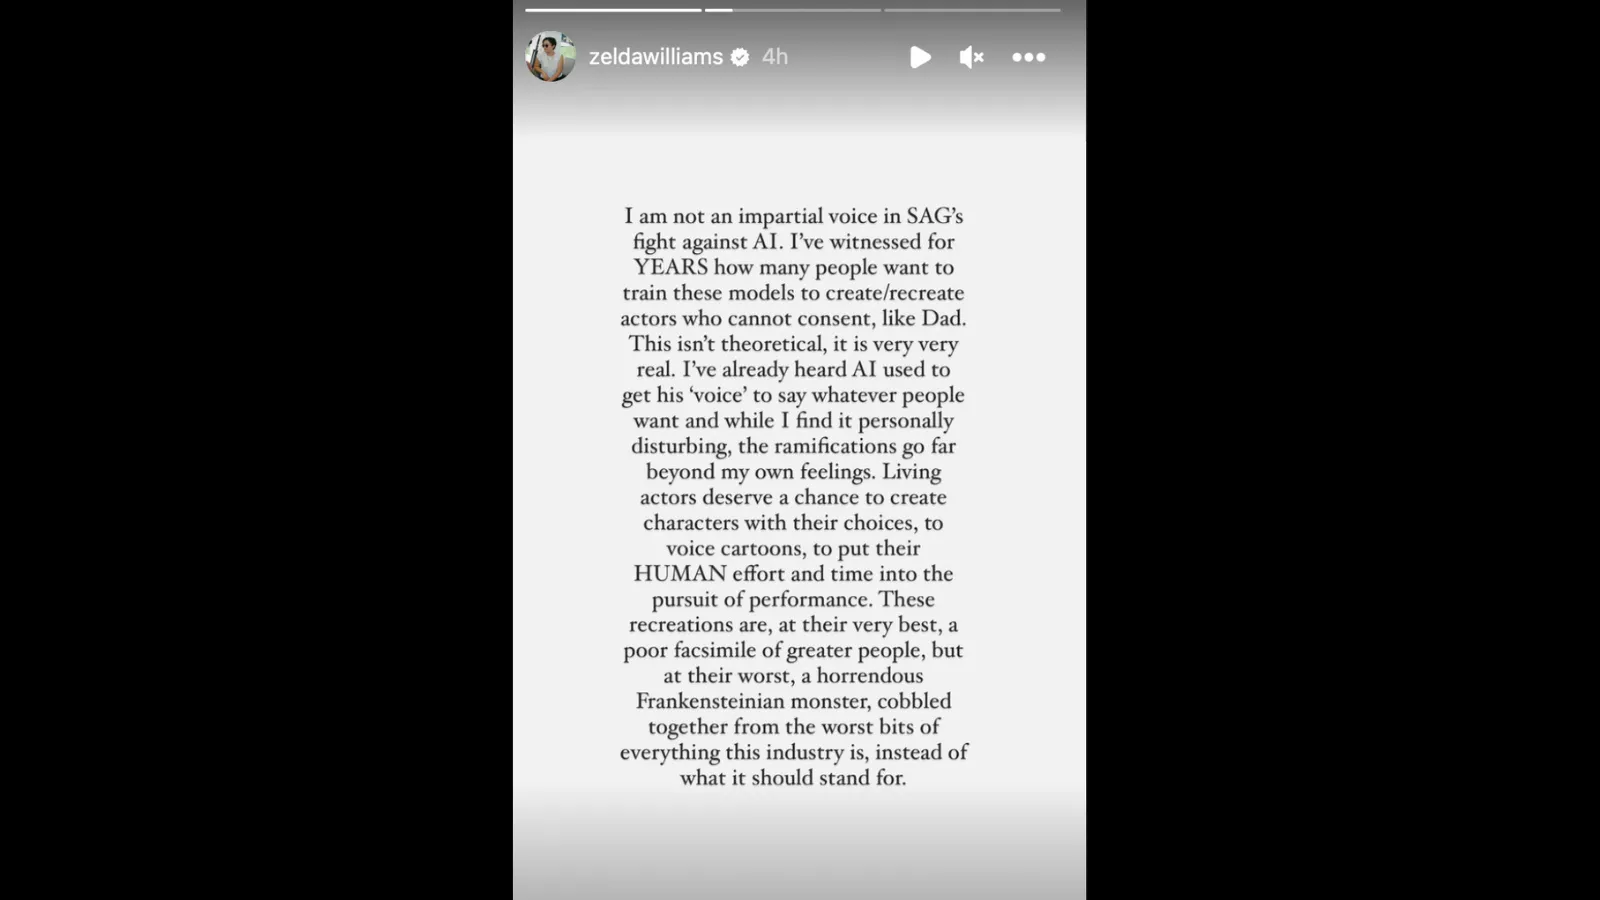 Zelda Williams' IG message on the AI deepfake of her father.